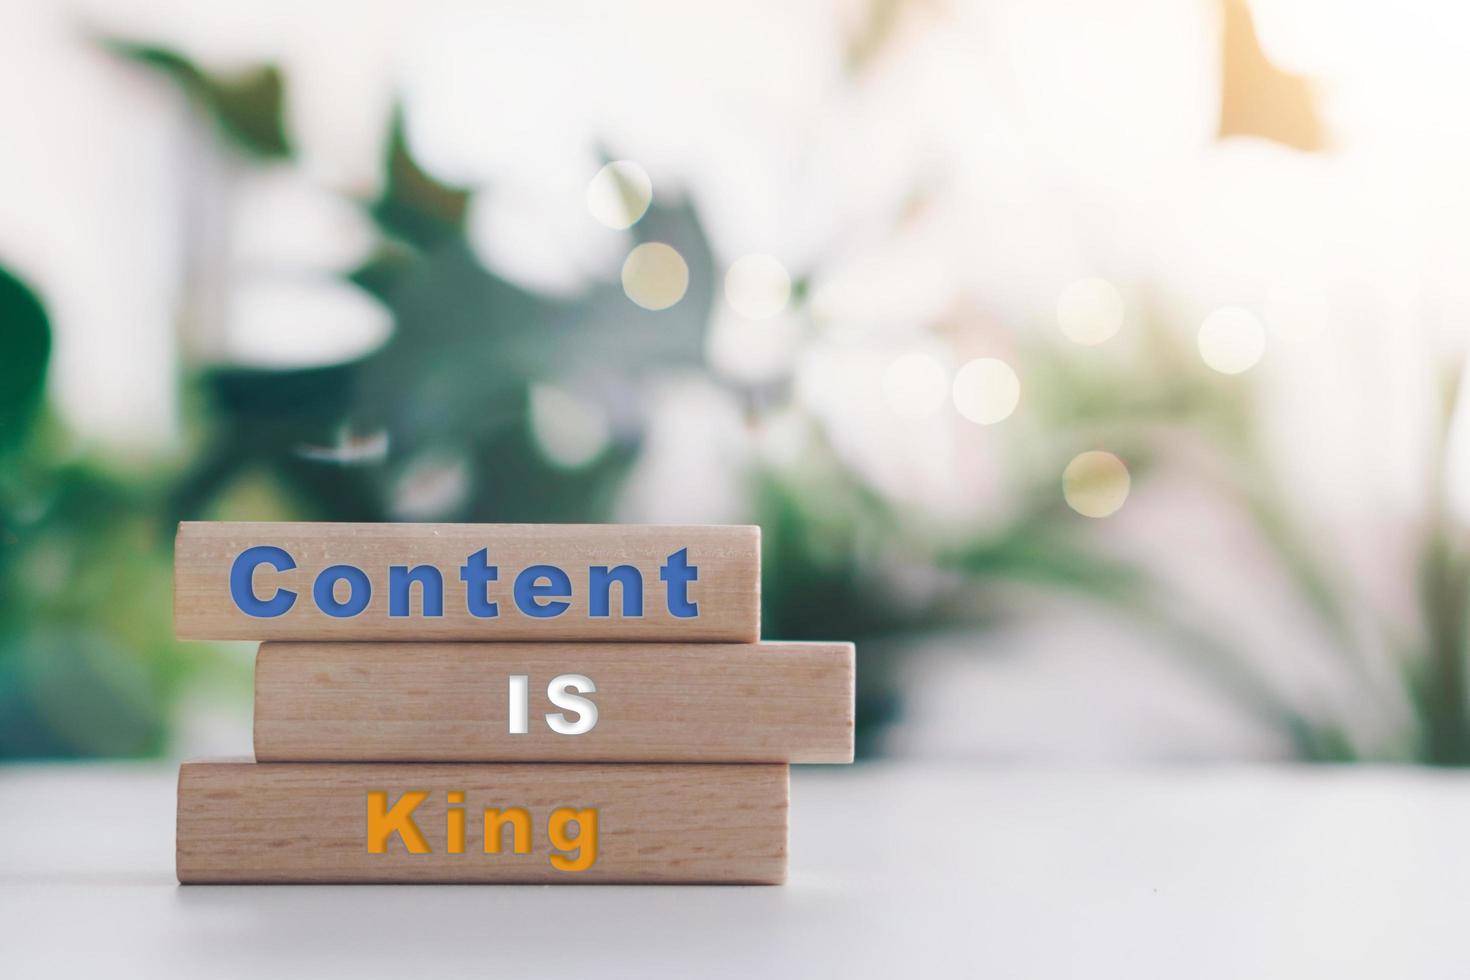 Content is king on wooden board with copy space background photo